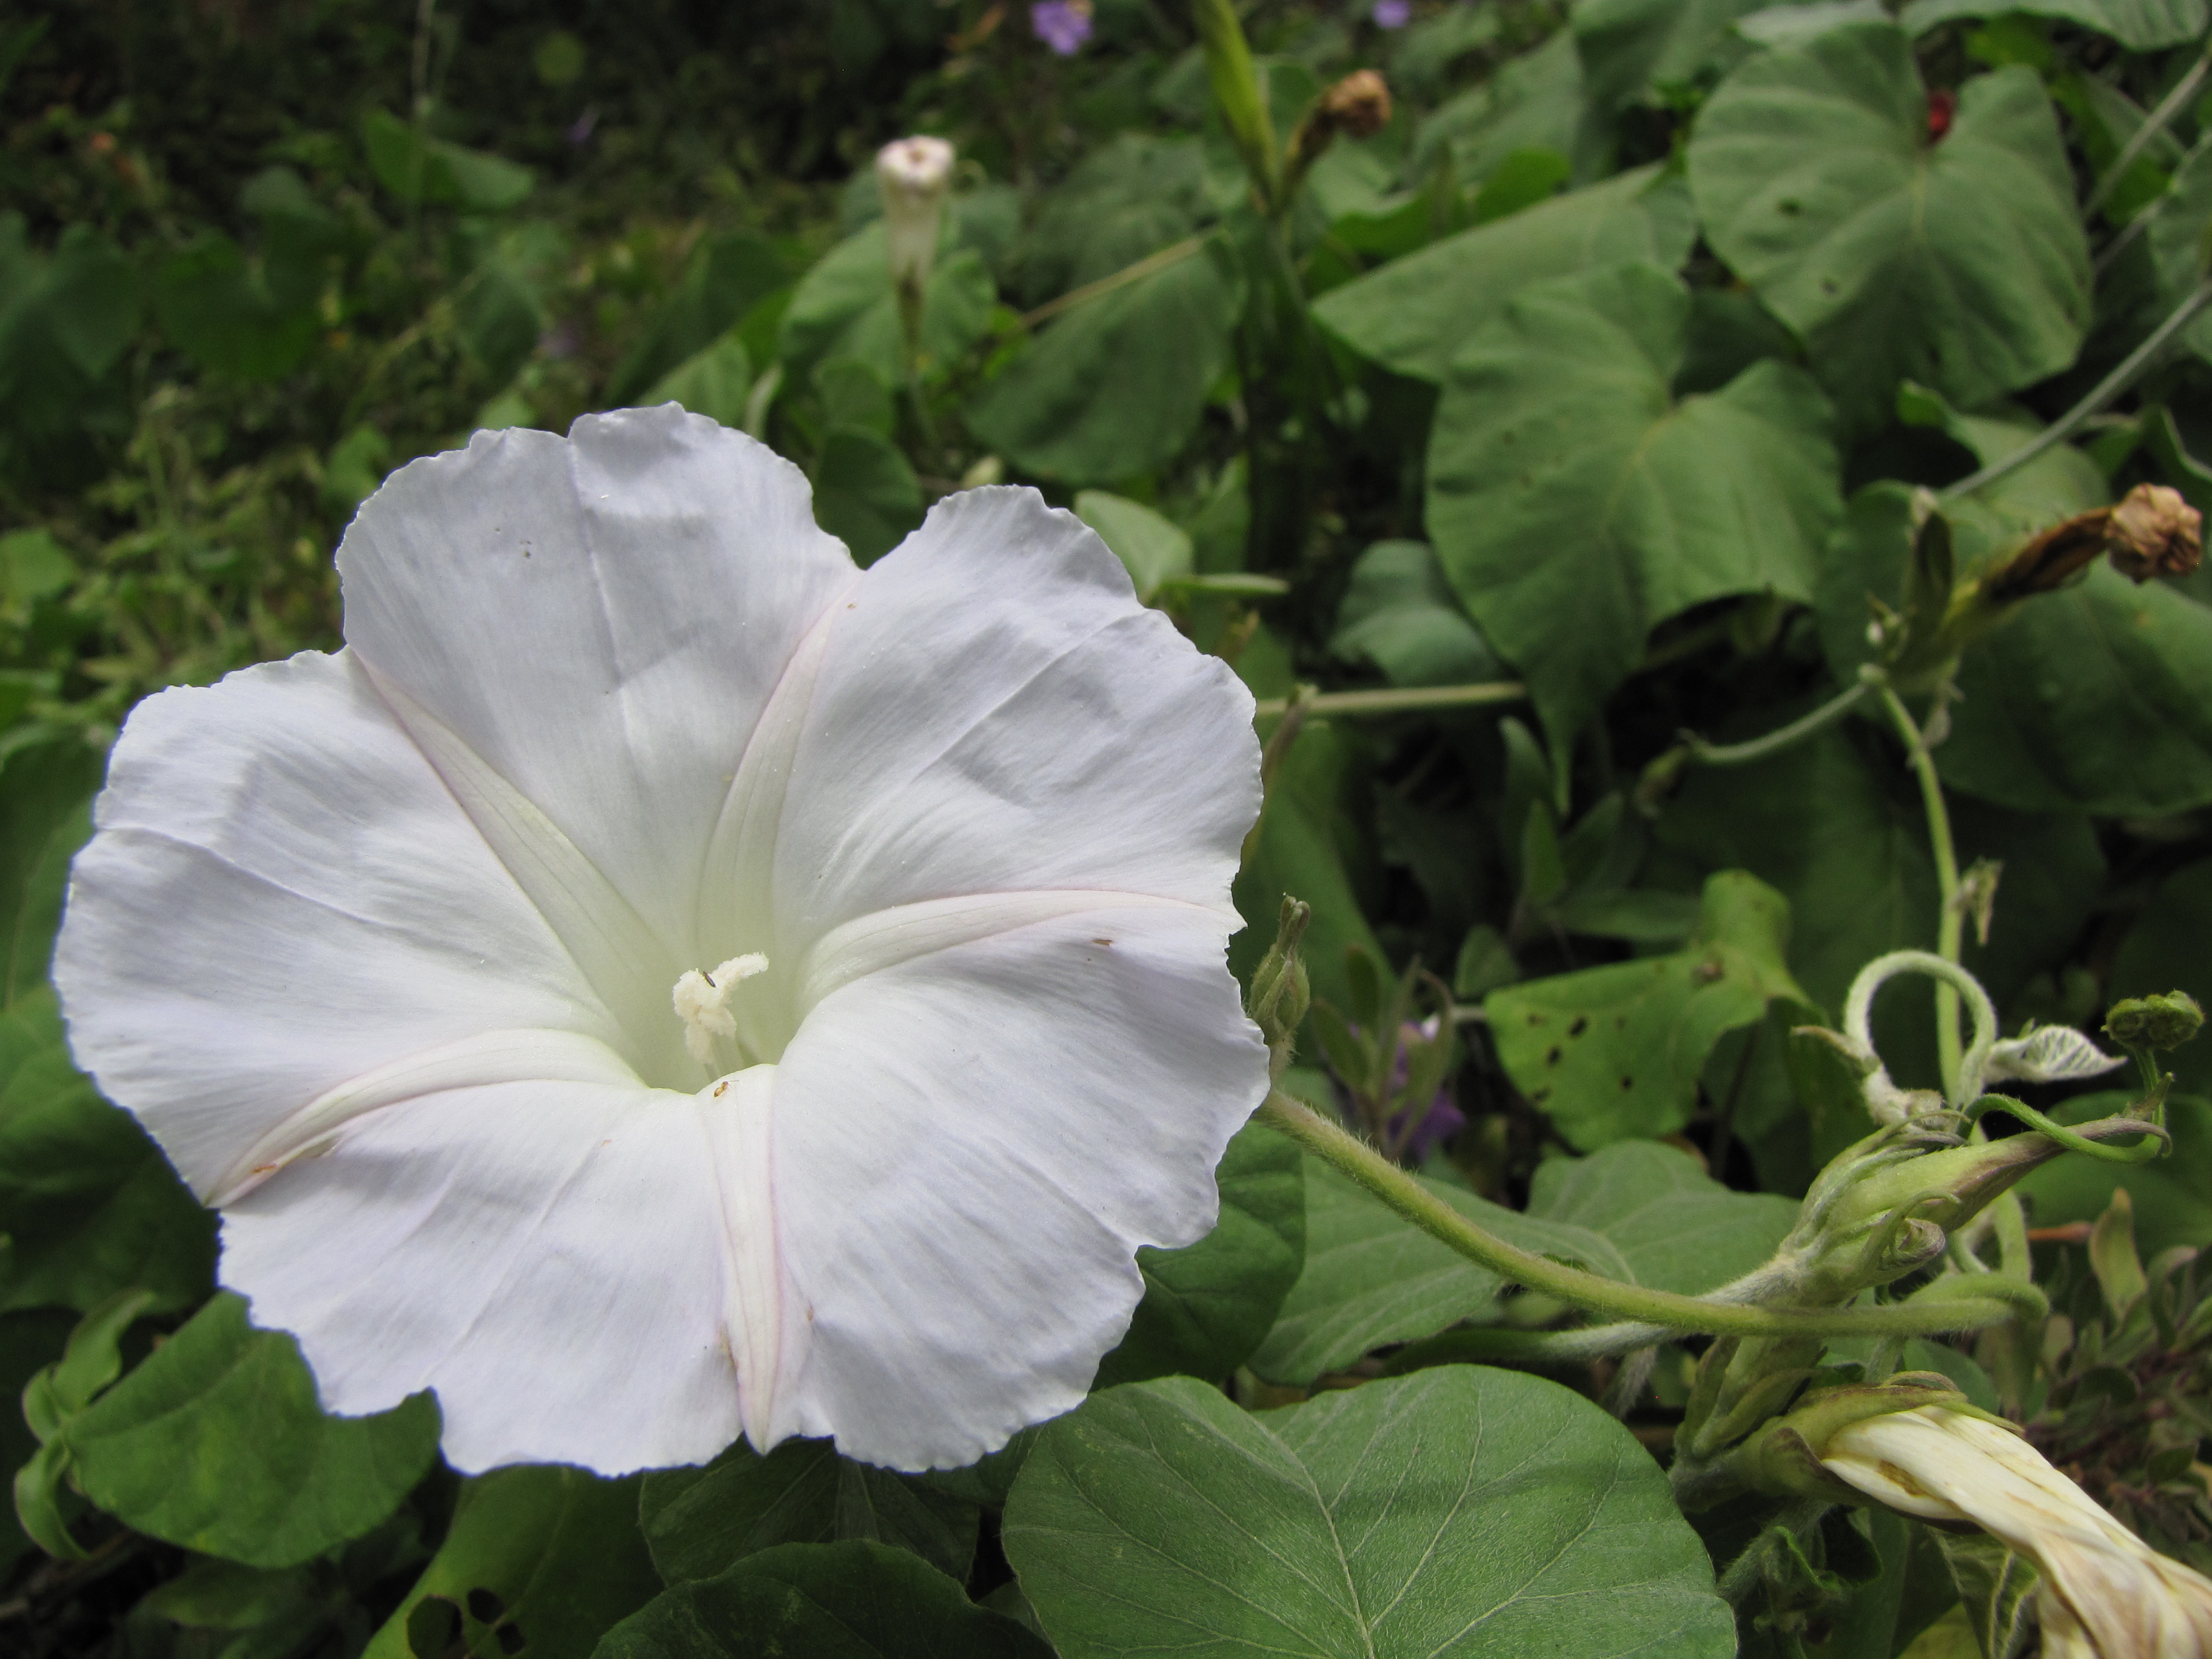 Starr-120424-4710-Ipomoea indica-white flower-Enchanting Floral Gardens of Kula-Maui (25046256821)